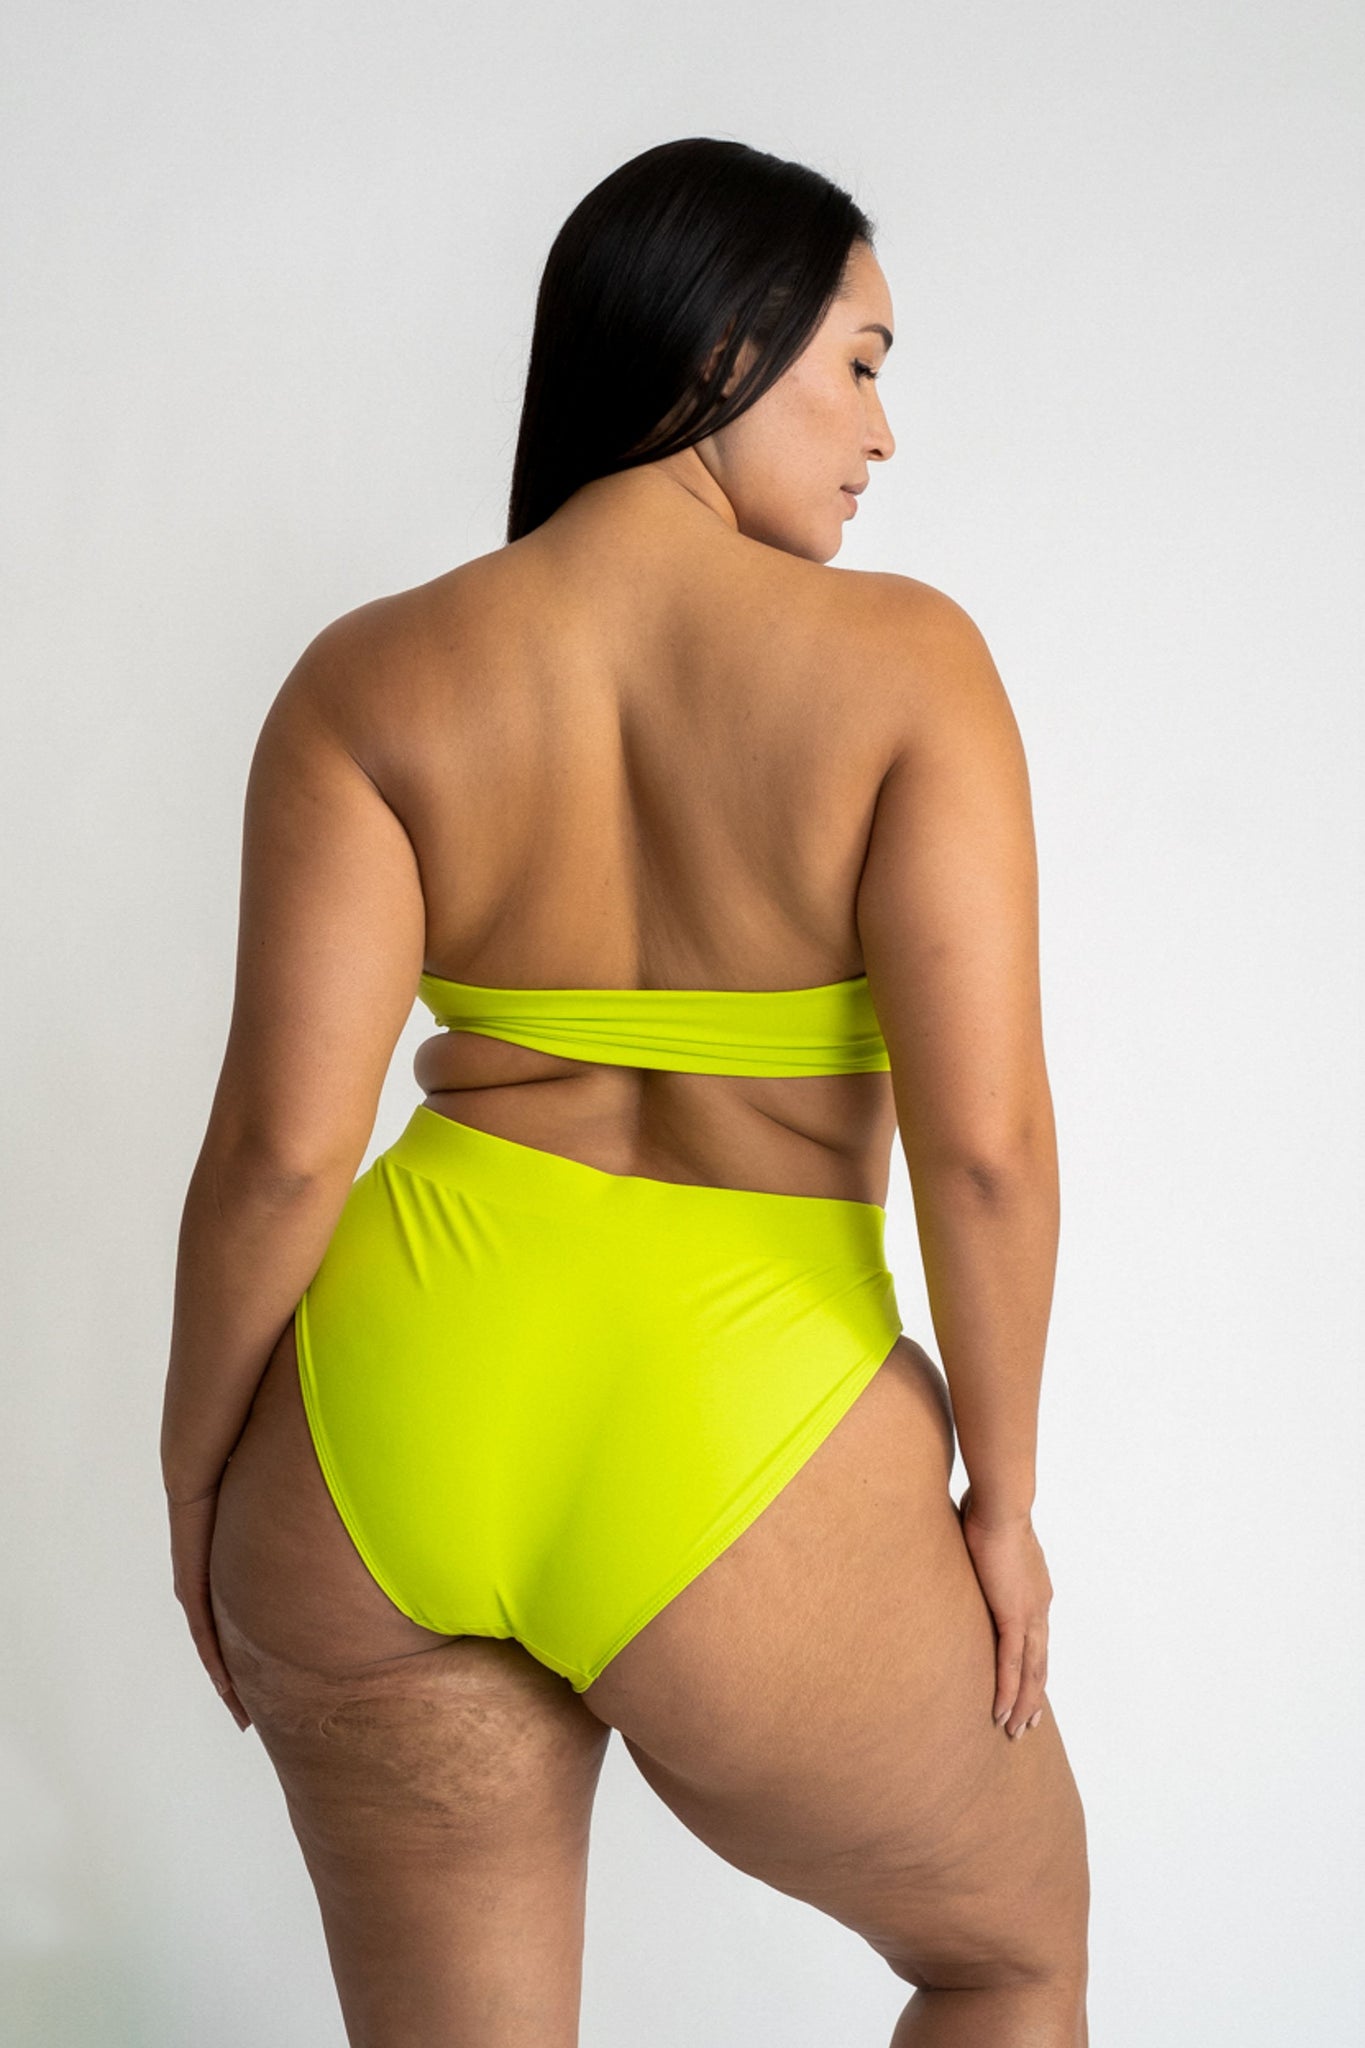 The back of a woman looking to the side standing in front of a white wall wearing bright neon green high waisted bikini bottoms with a matching bright green strapless bandeau bikini top.